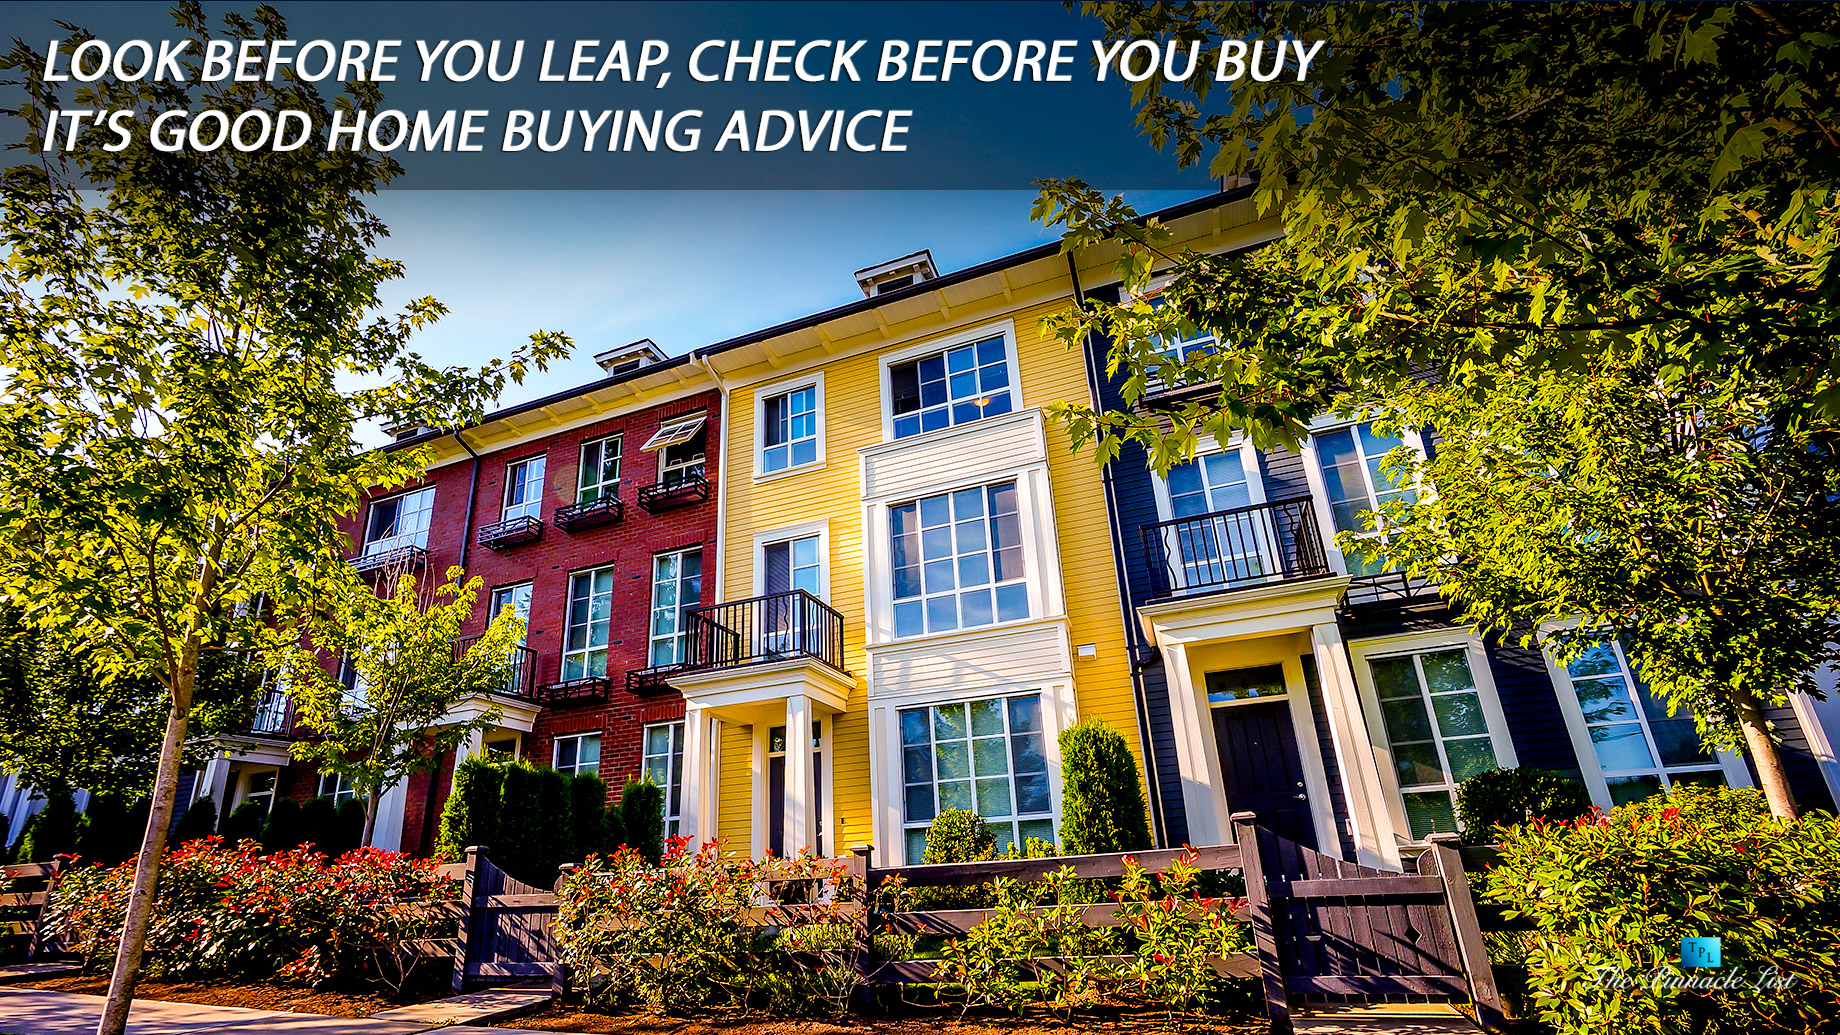 Look Before You Leap, Check Before You Buy – It’s Good Home Buying Advice